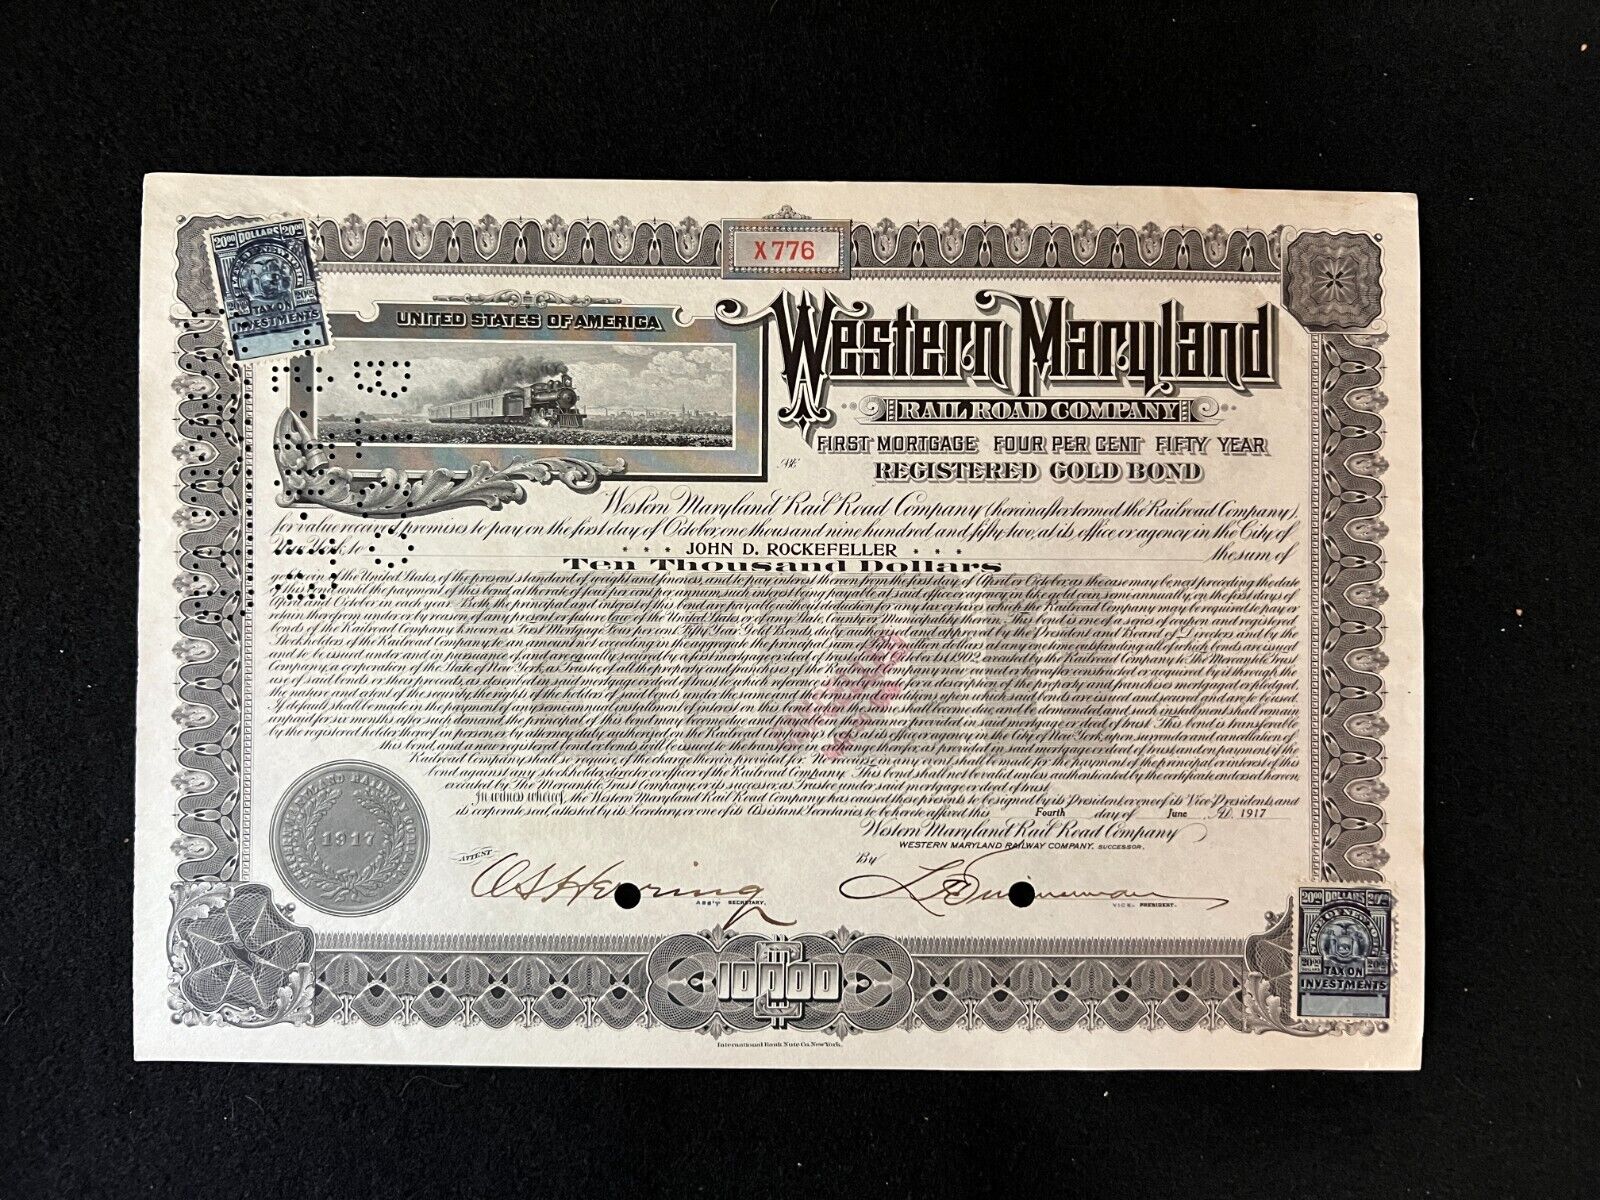 1917 Western Maryland Railroad Company Gold Bond Issued to John D. Rockefeller